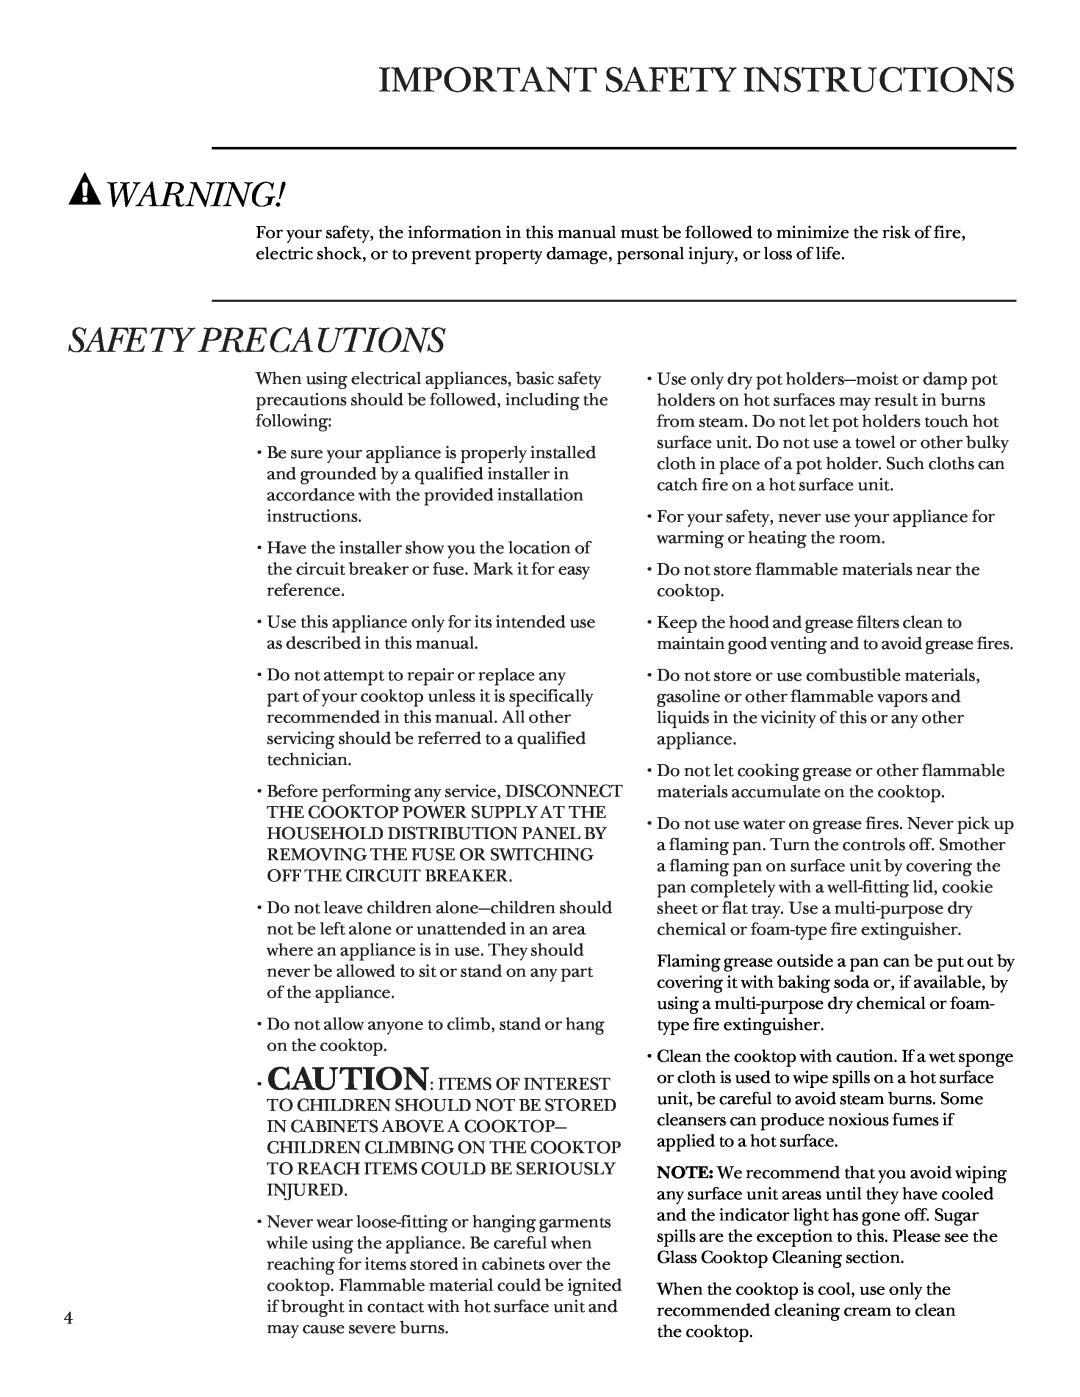 GE 164D3333P235 owner manual Important Safety Instructions, Safety Precautions 